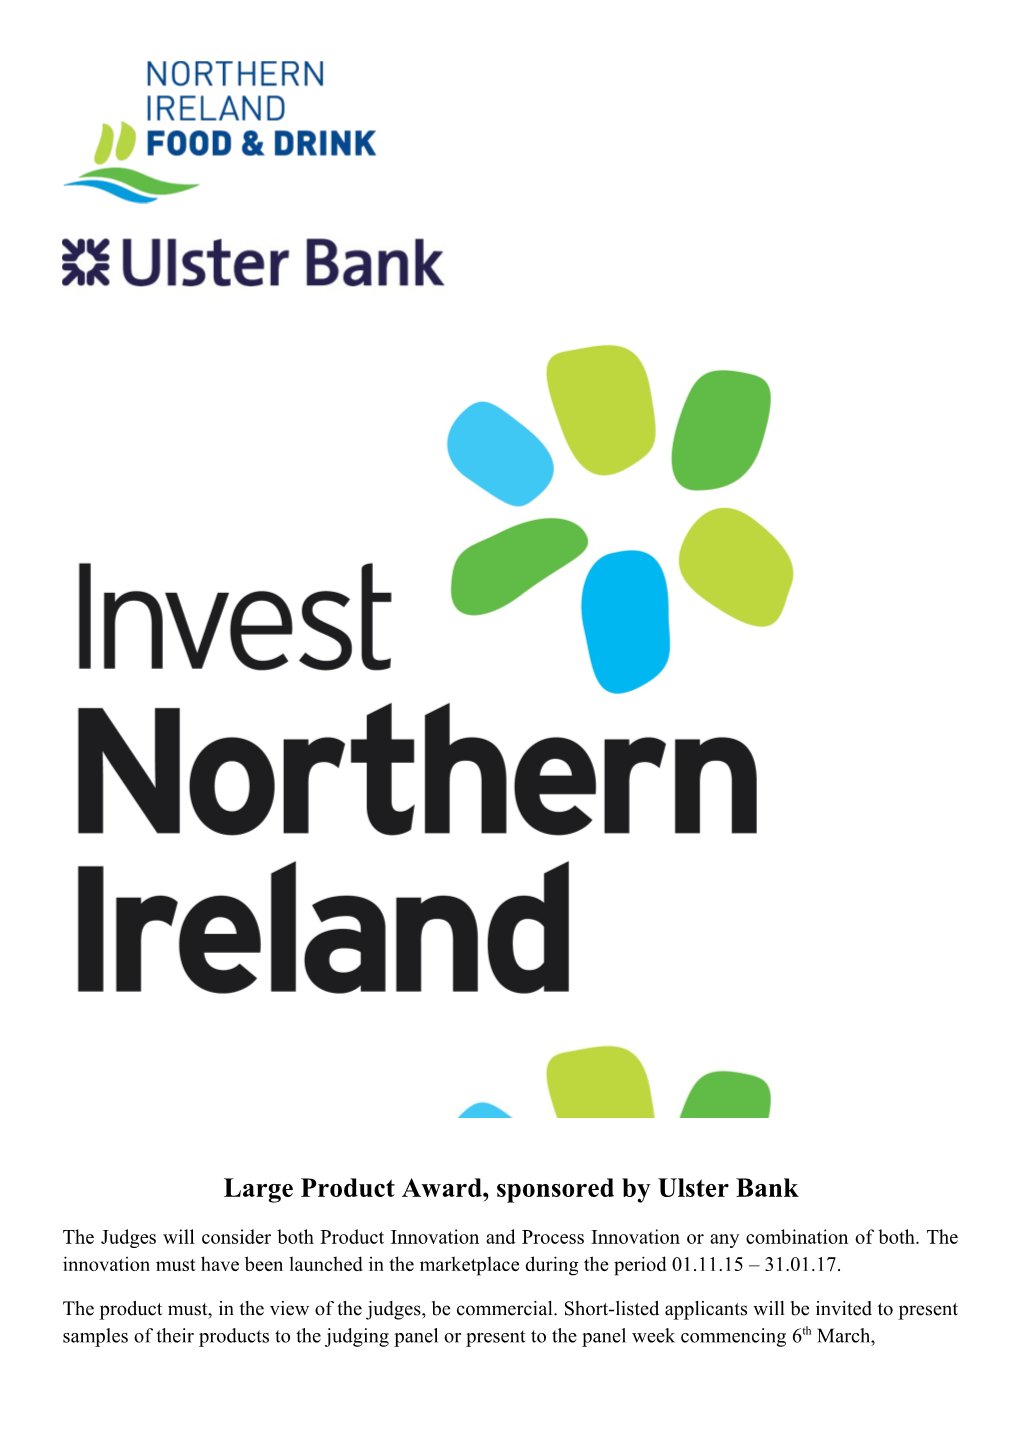 Large Product Award, Sponsored by Ulster Bank